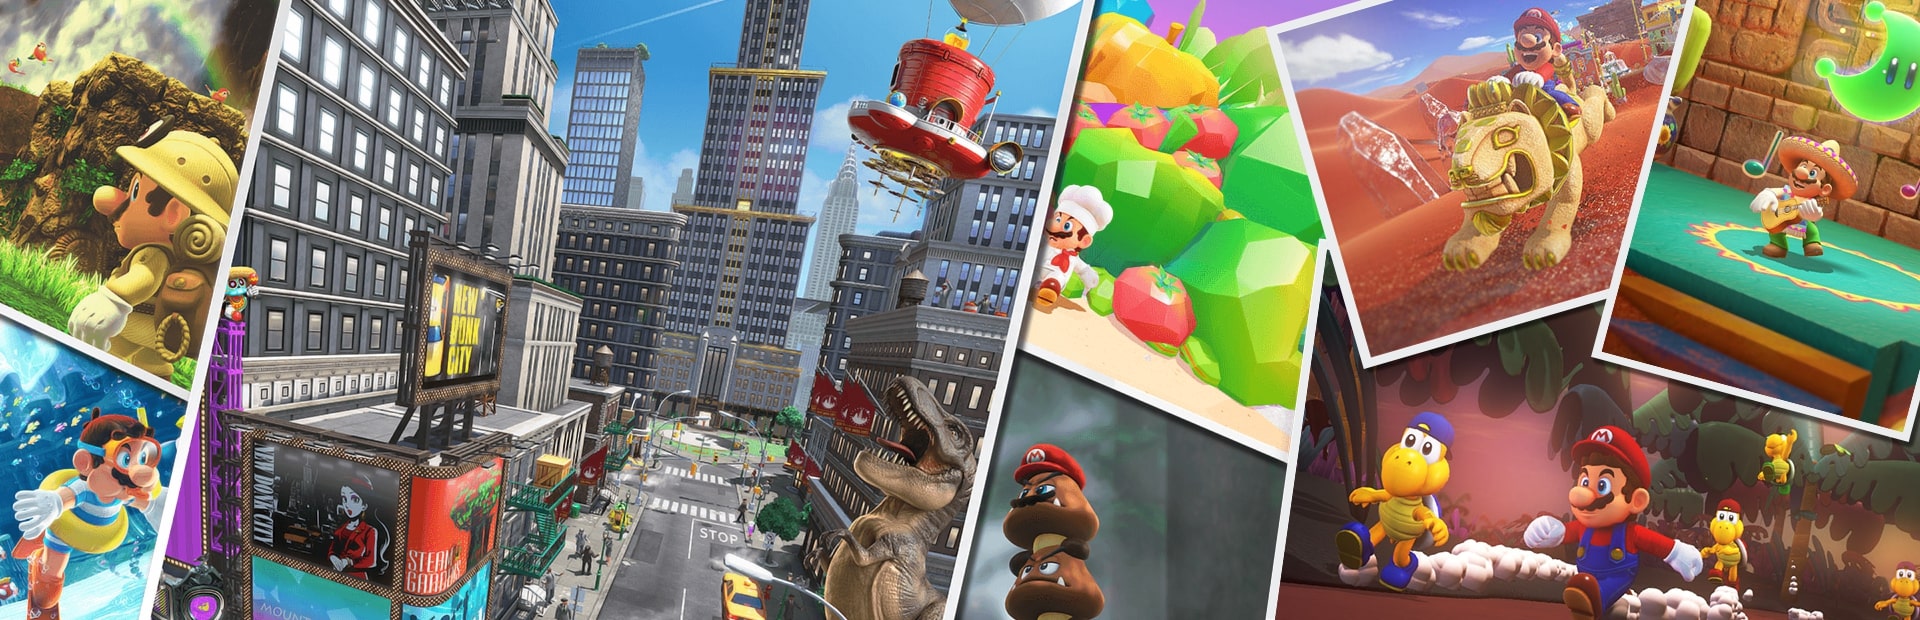 Super Mario Odyssey | Now Available at PJ's Games